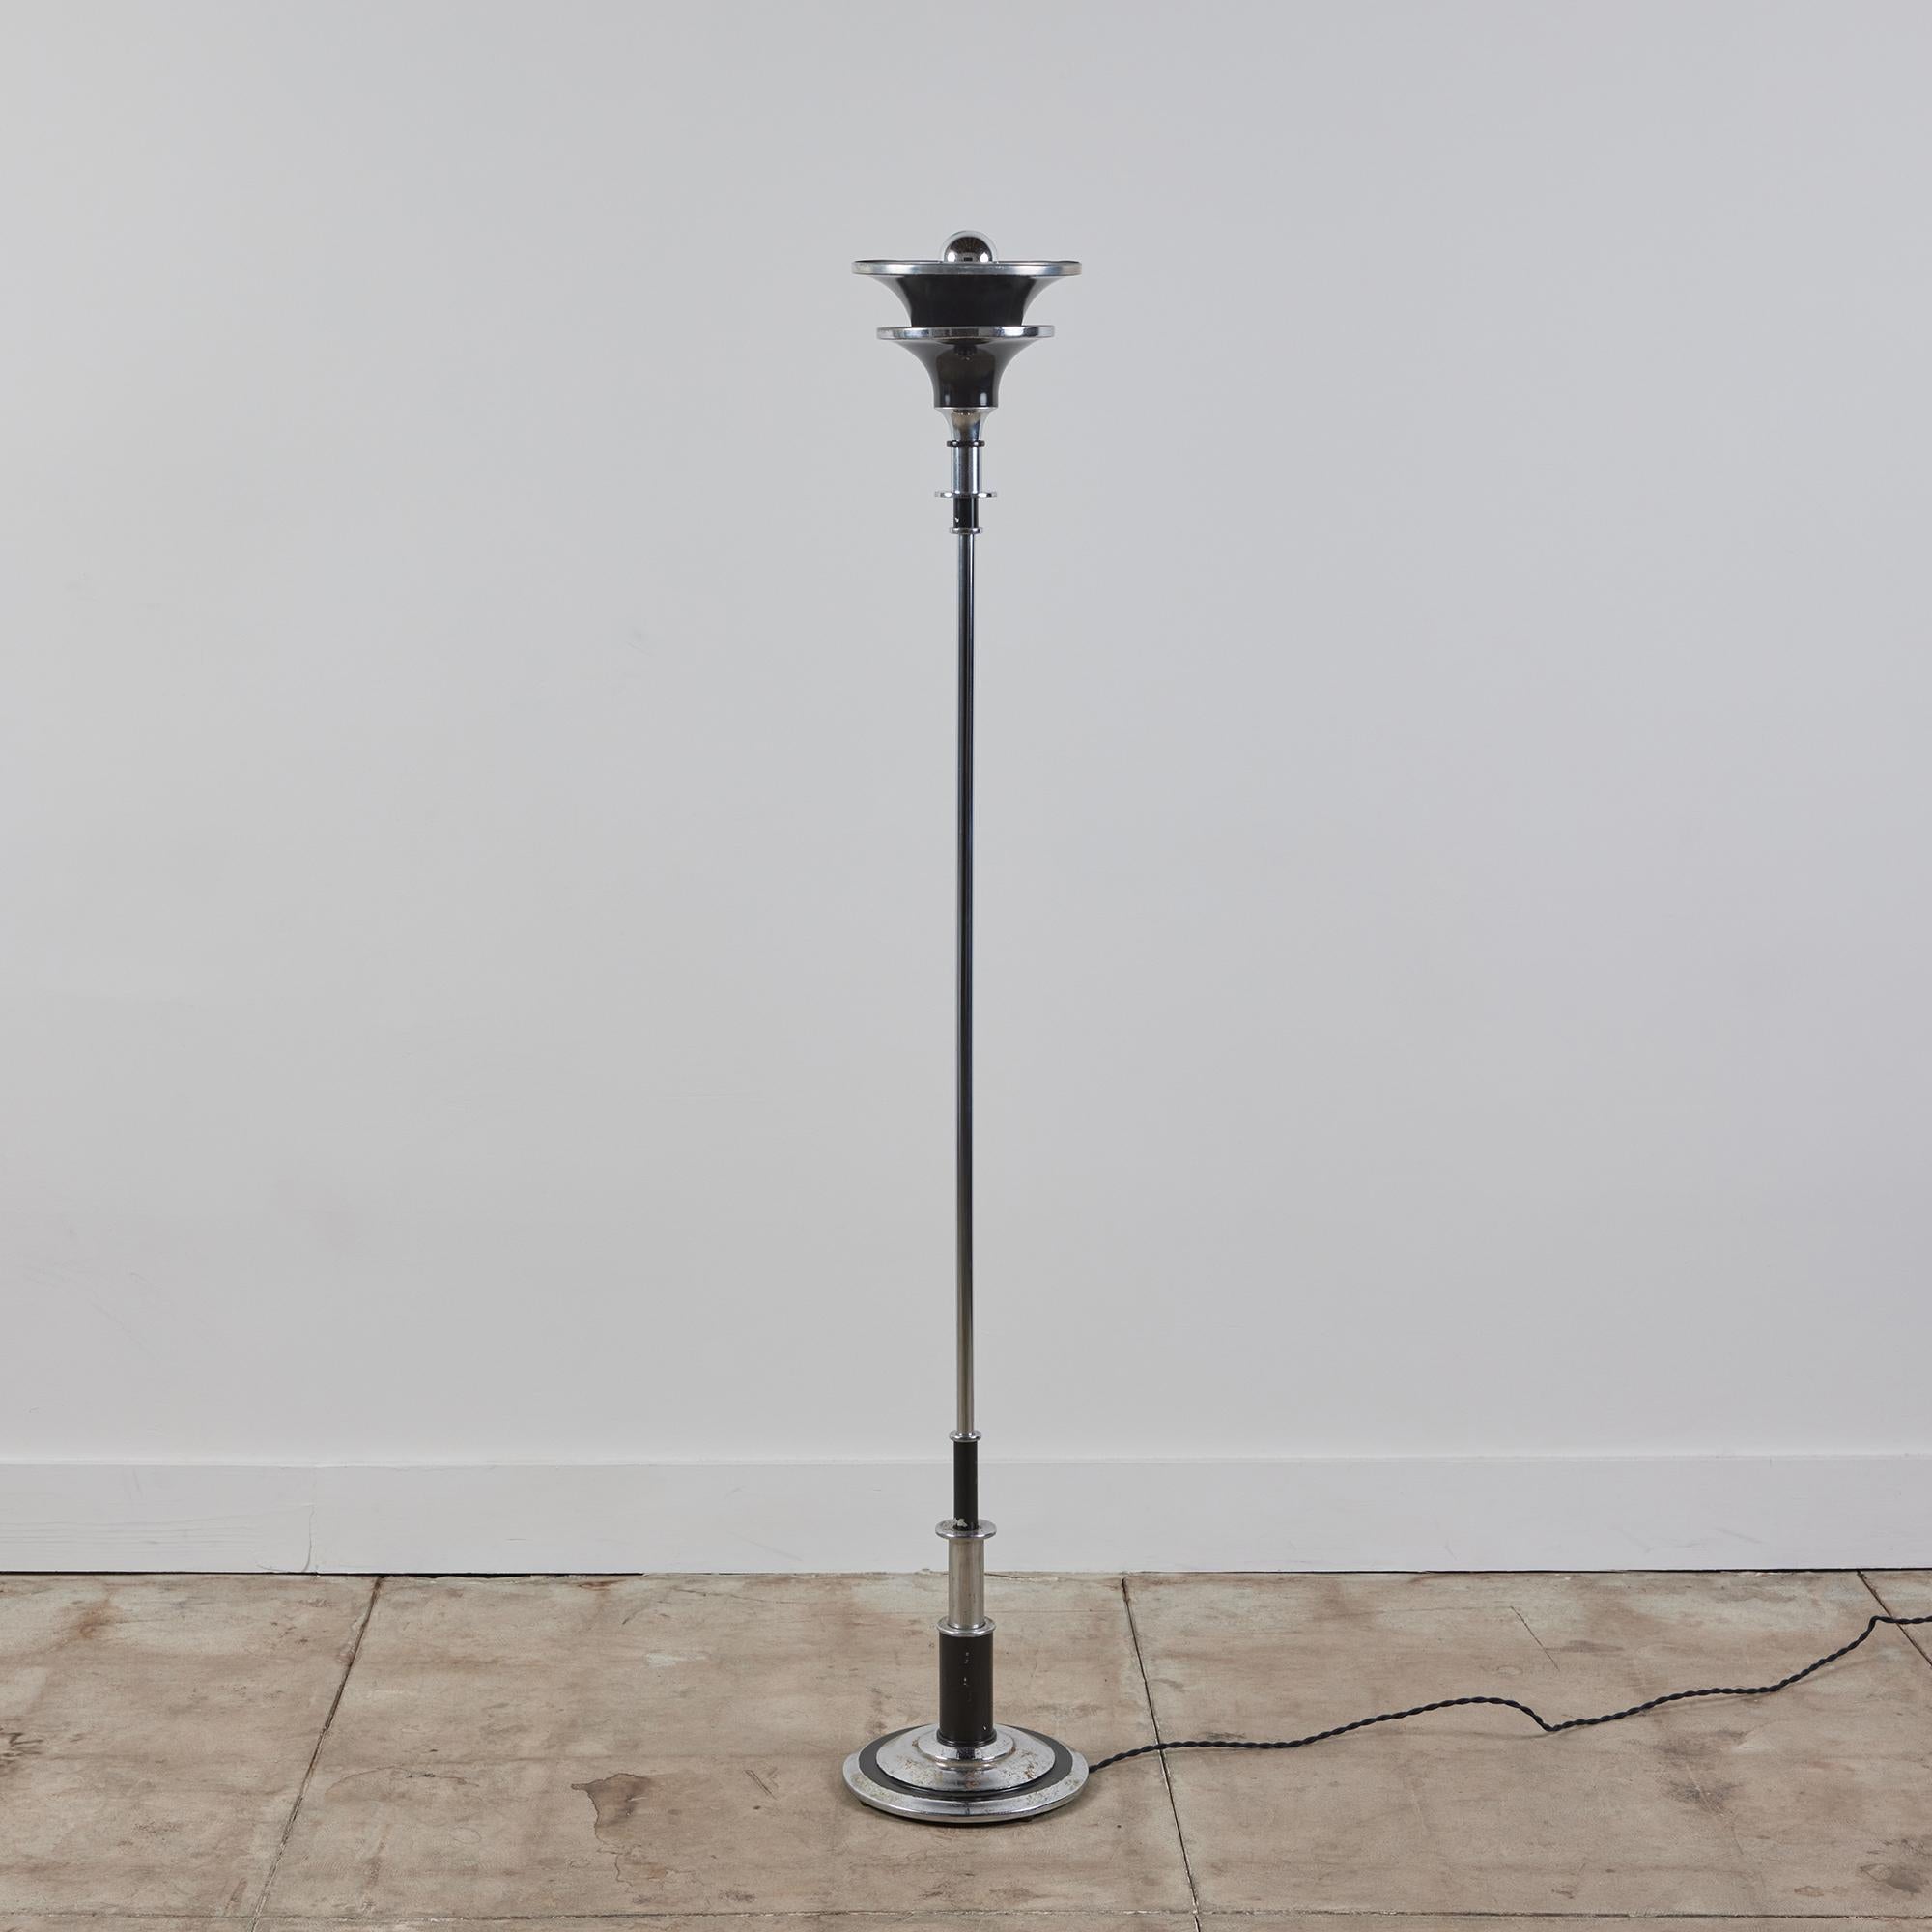 Art Deco mixed metal floor lamp. This lamp features a spun aluminum top shade and a chrome plated stem and base. The lamp has alternating chrome and black enameled details.

Dimensions
﻿10.25